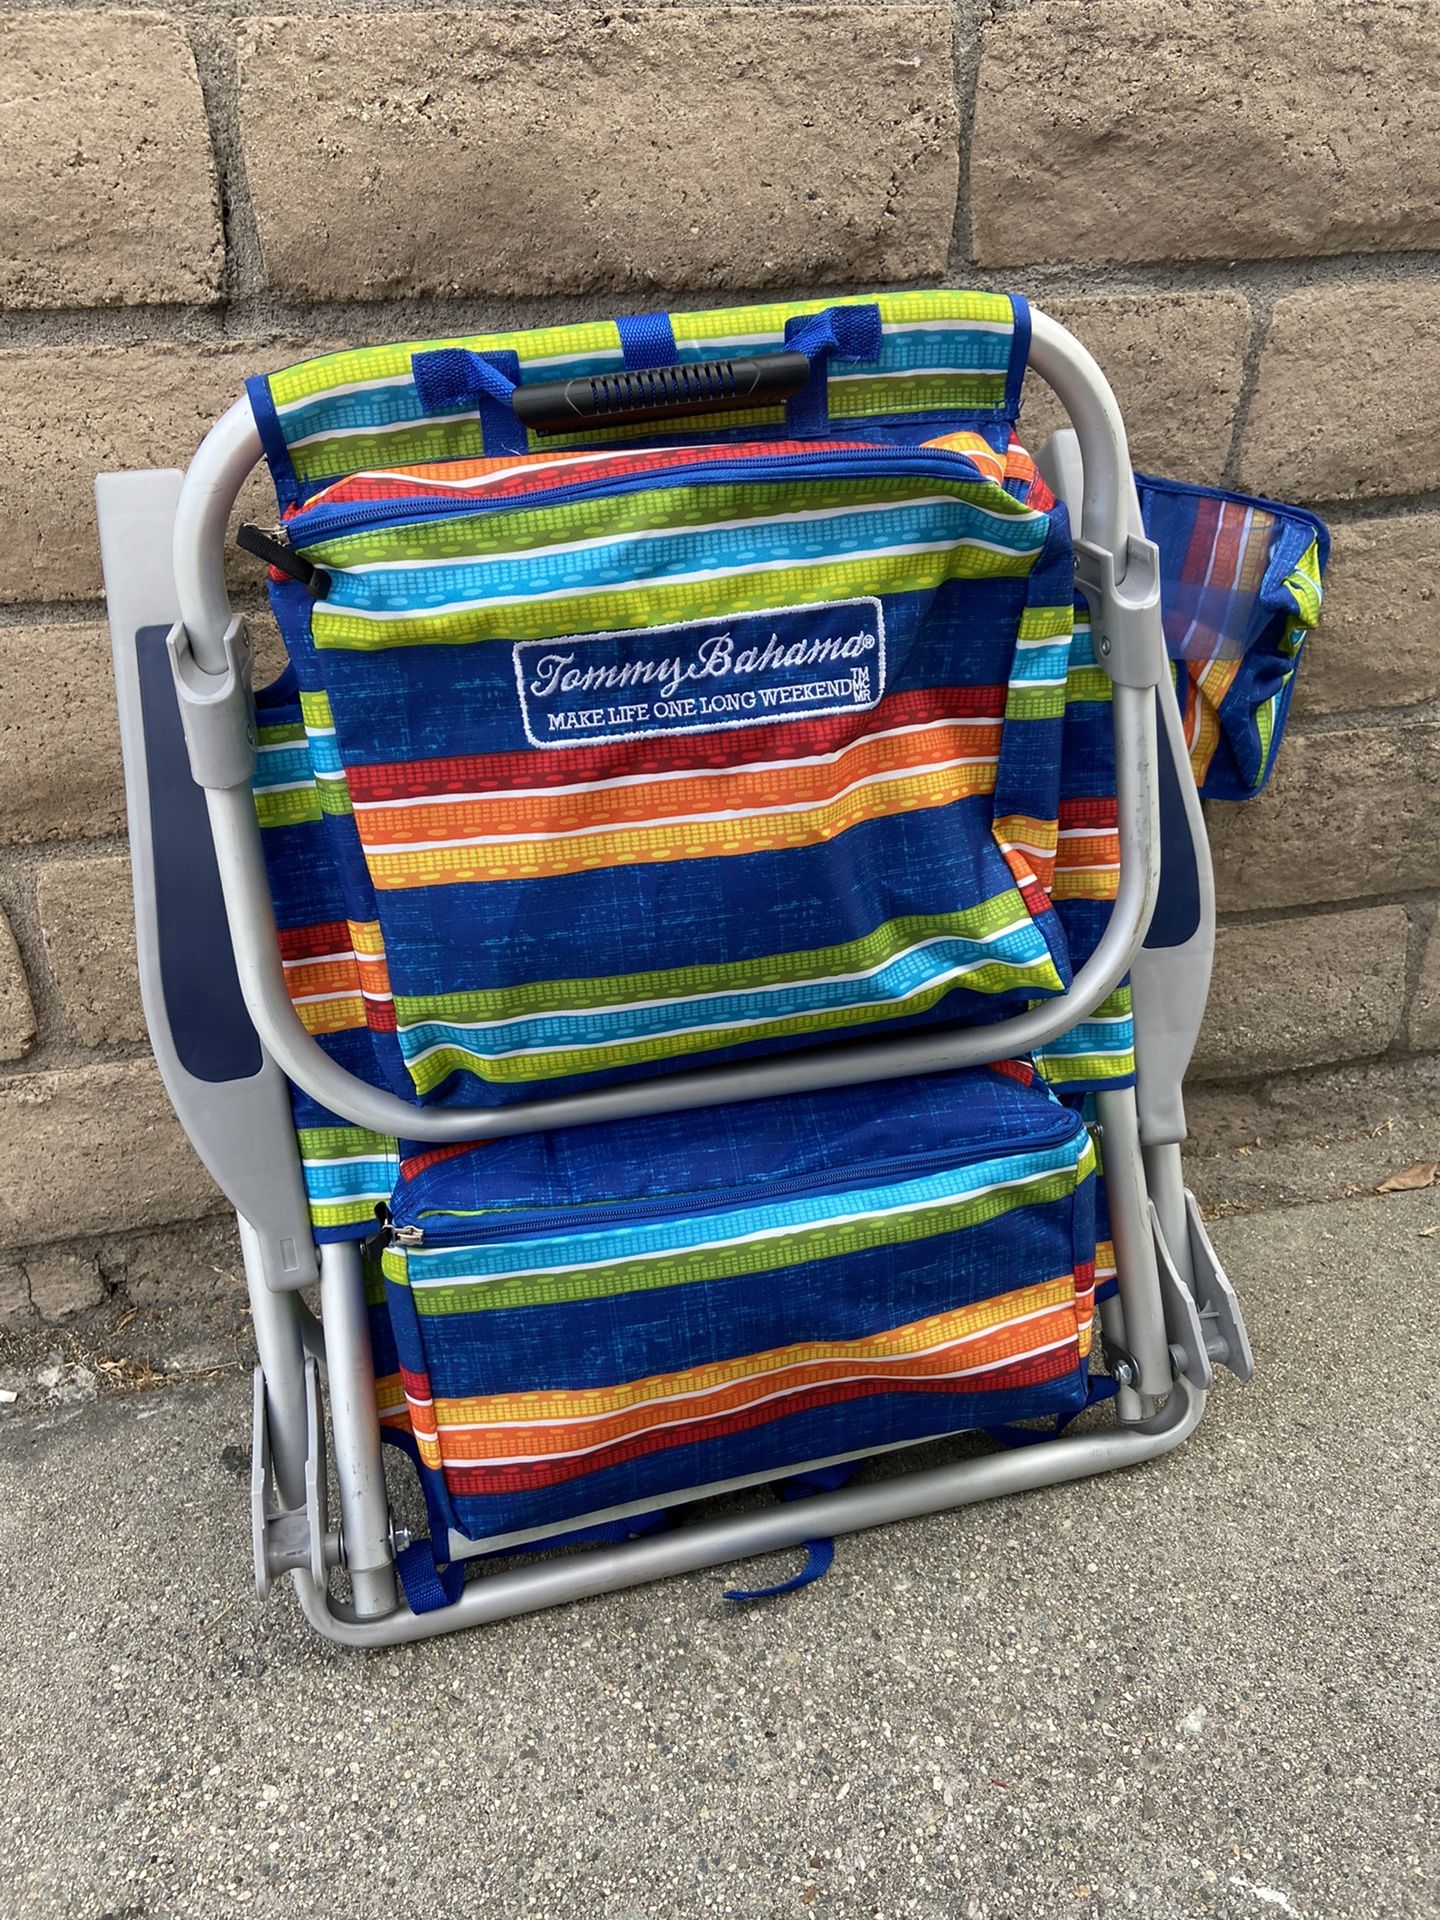 Tommy bahama backpack chair